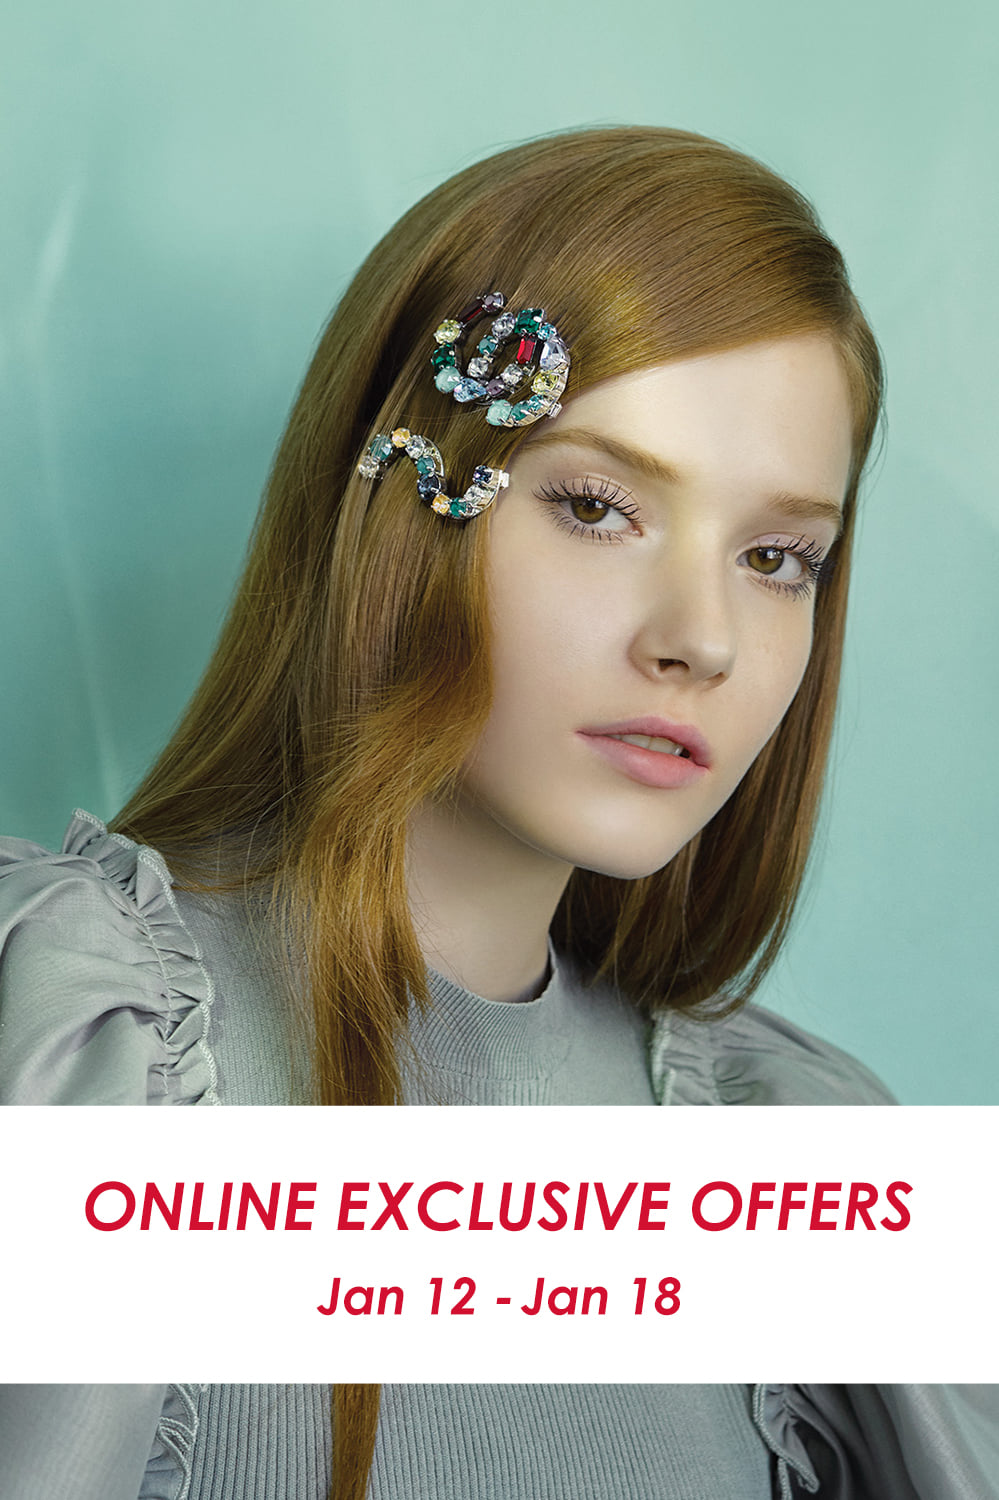 Online Exclusive Offers from ALEXANDRE ZOUARI! The offers start from today until 18 Jan